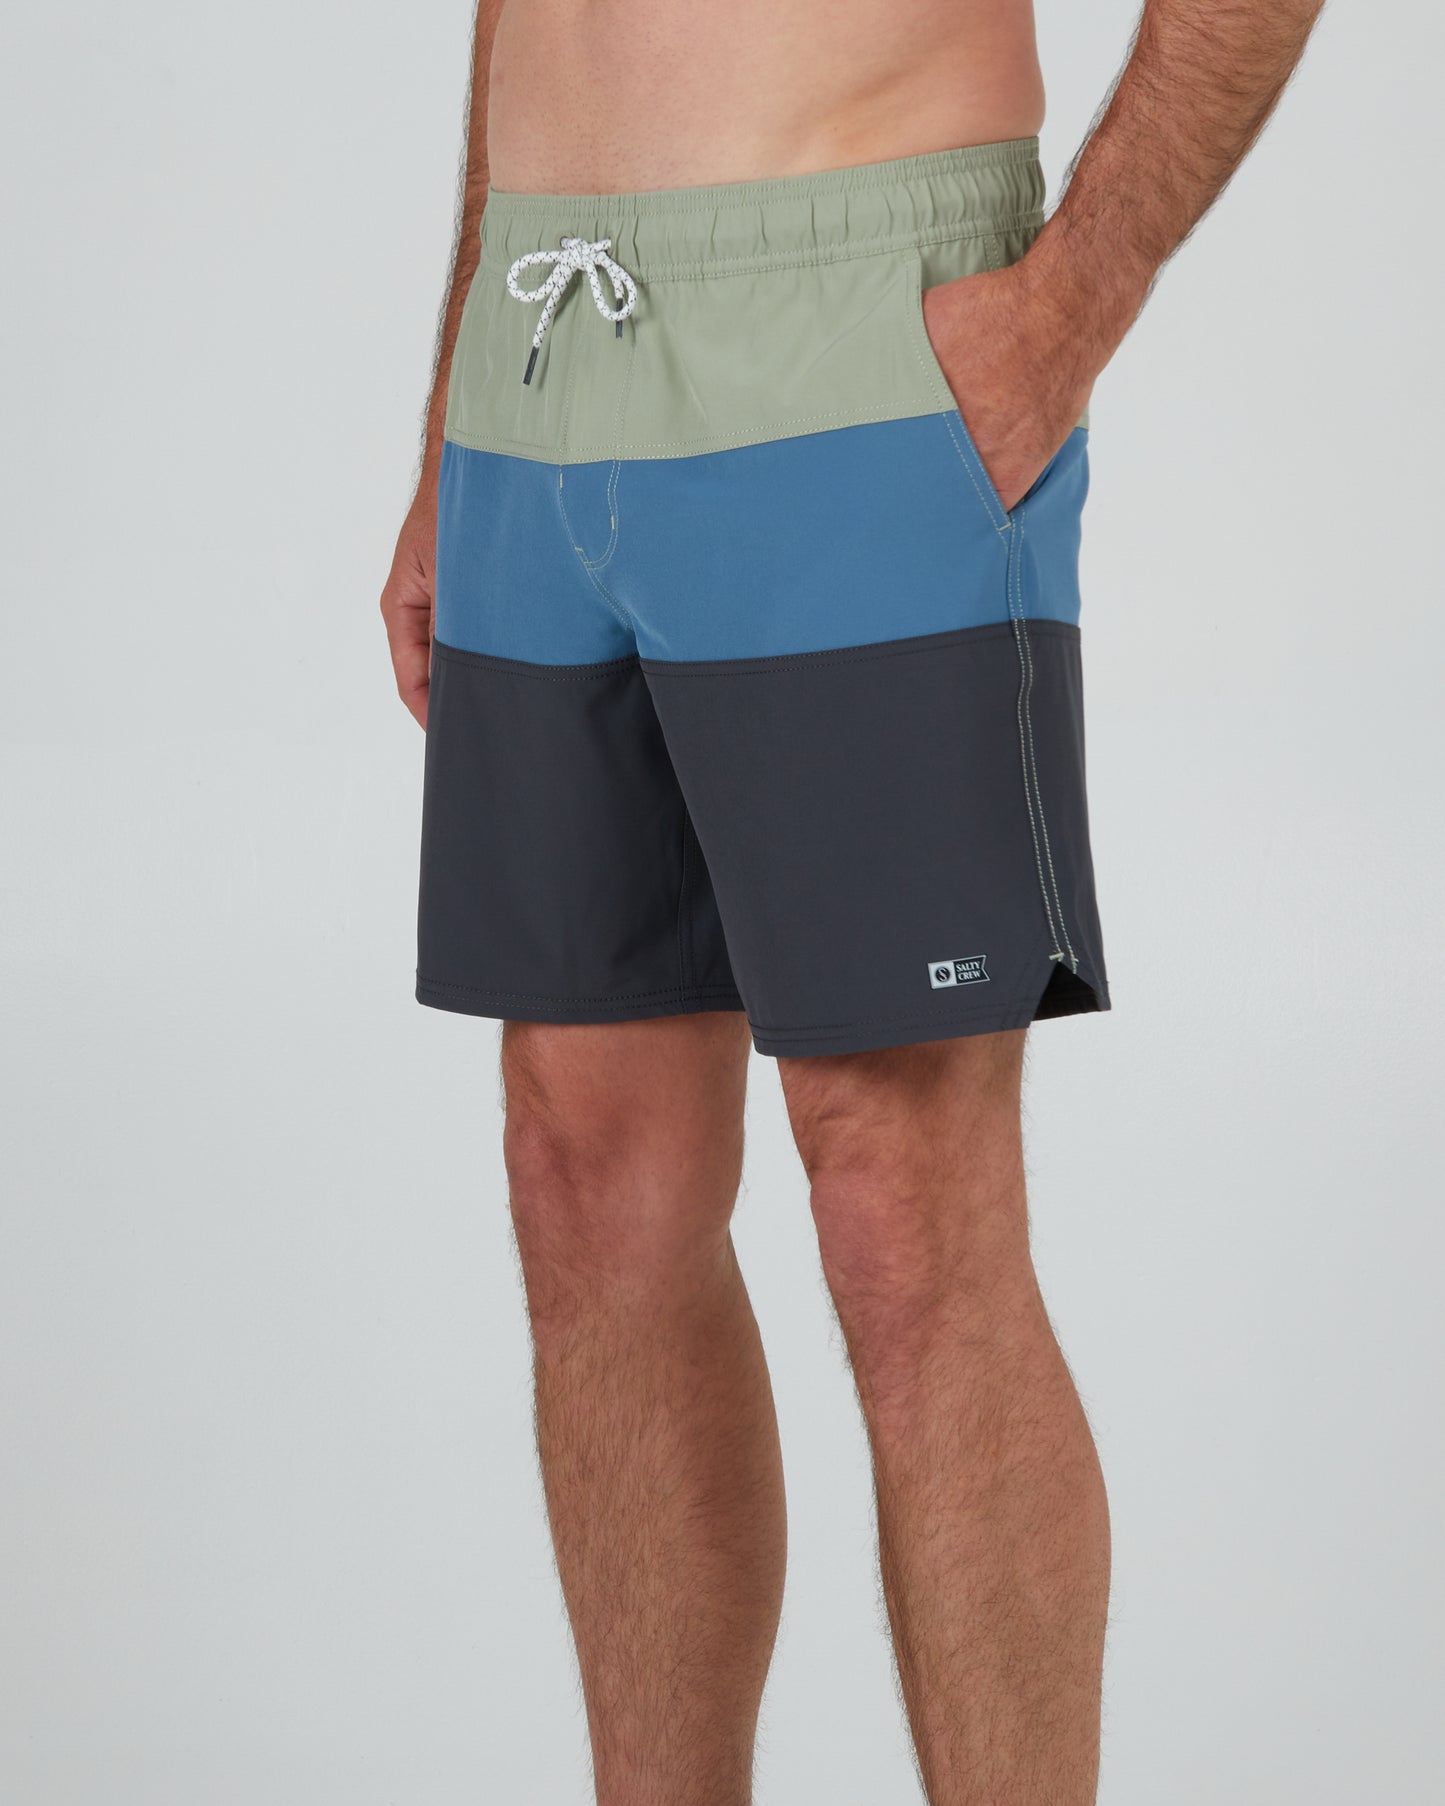 front angled view of Beacons 2 Dusty Sage Elastic Boardshort